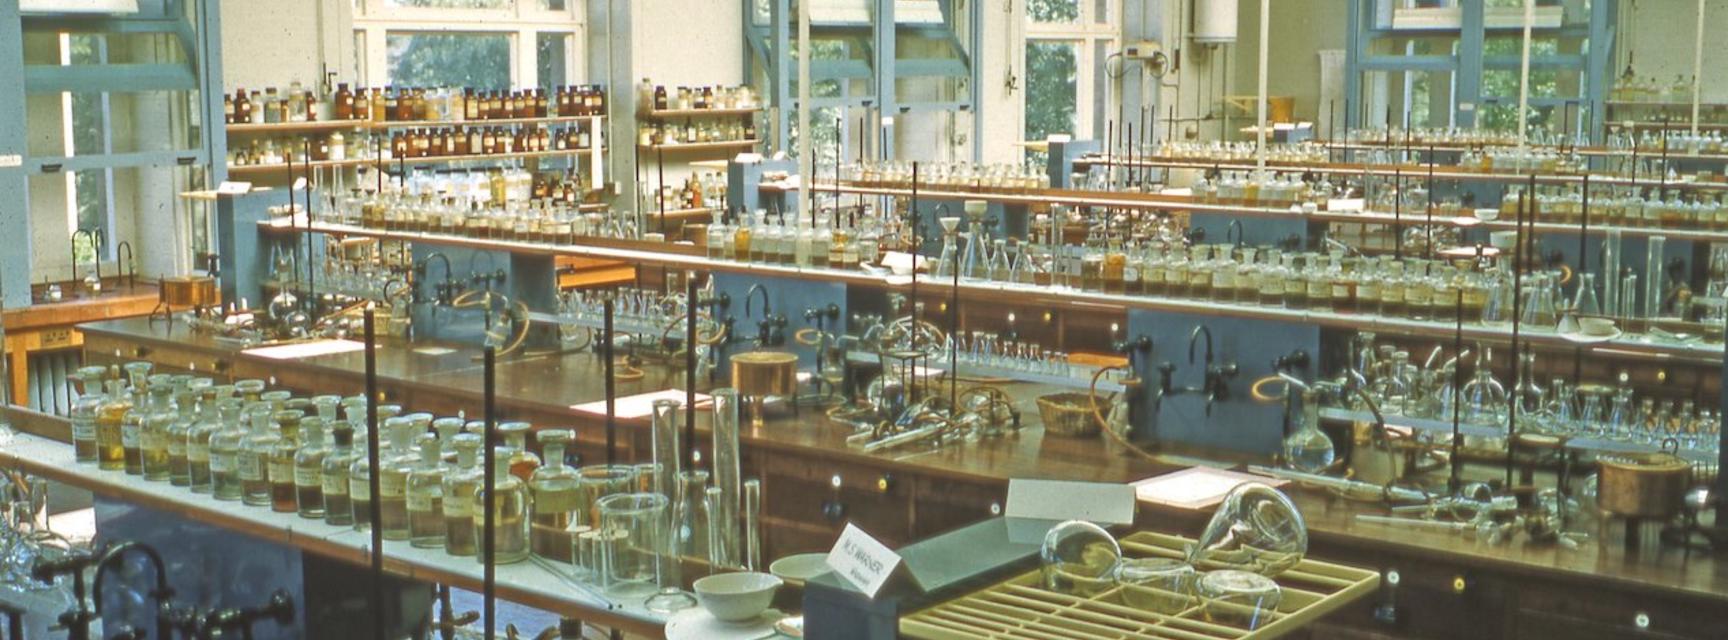 Photo of the inside of the Dyson Perrins Organic Teaching Laboratory